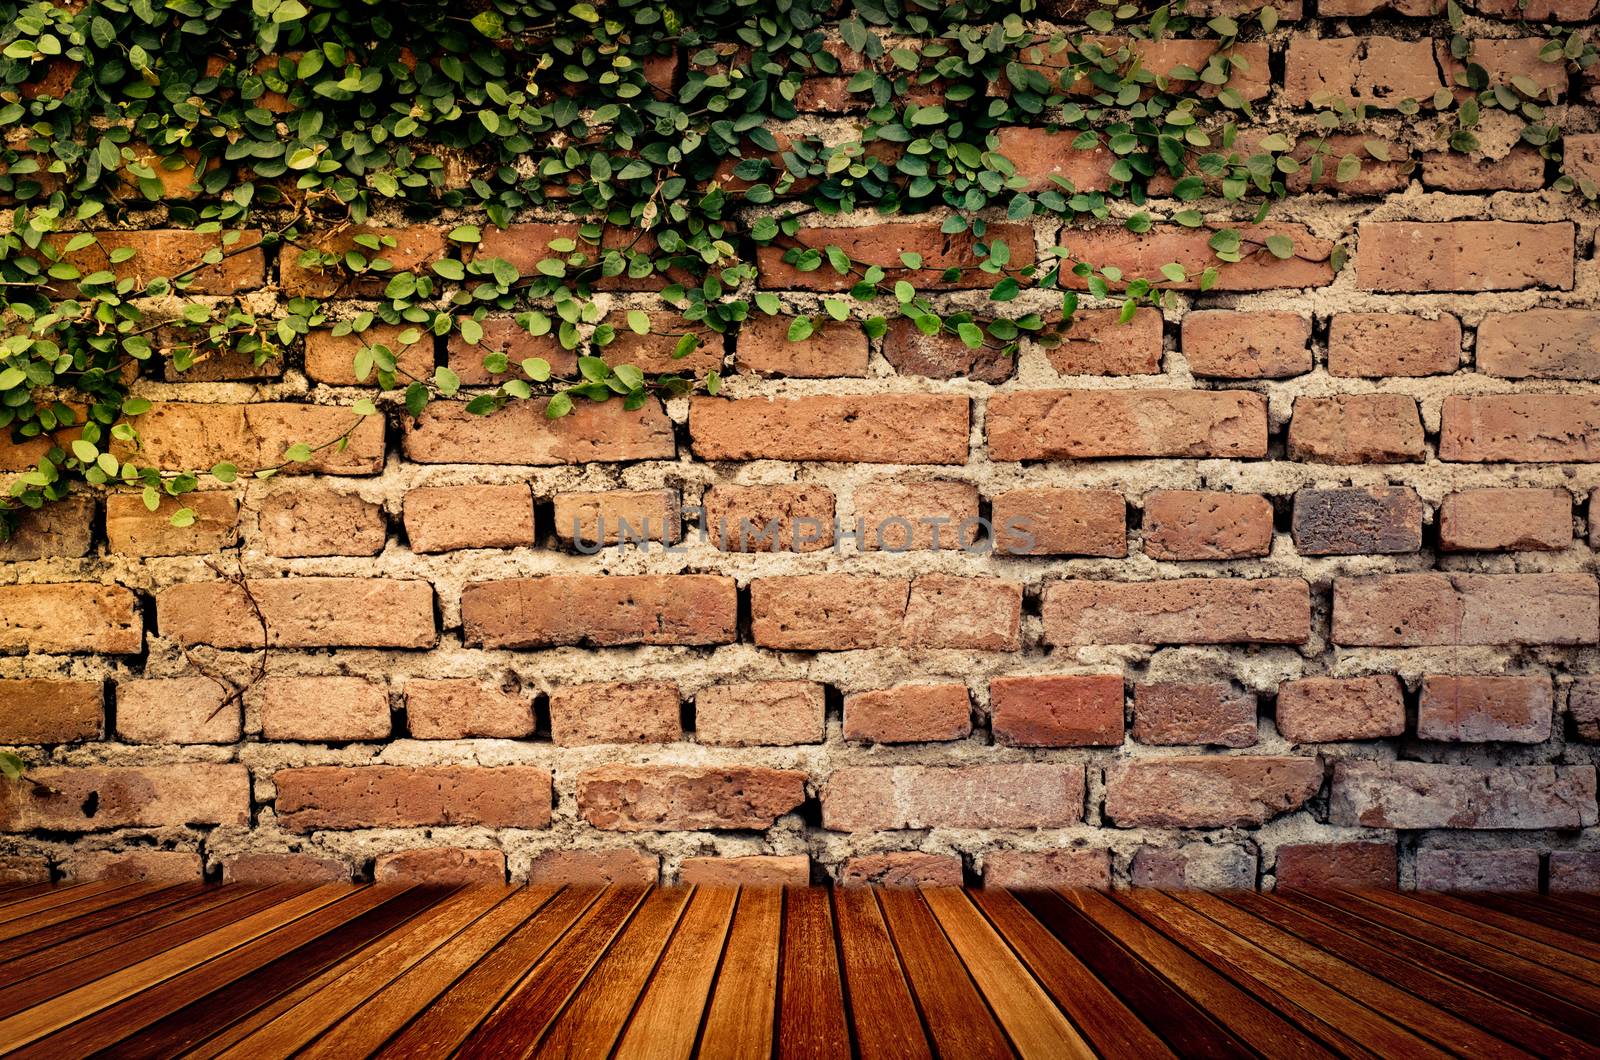 Wooden plank and leaves on brick wall